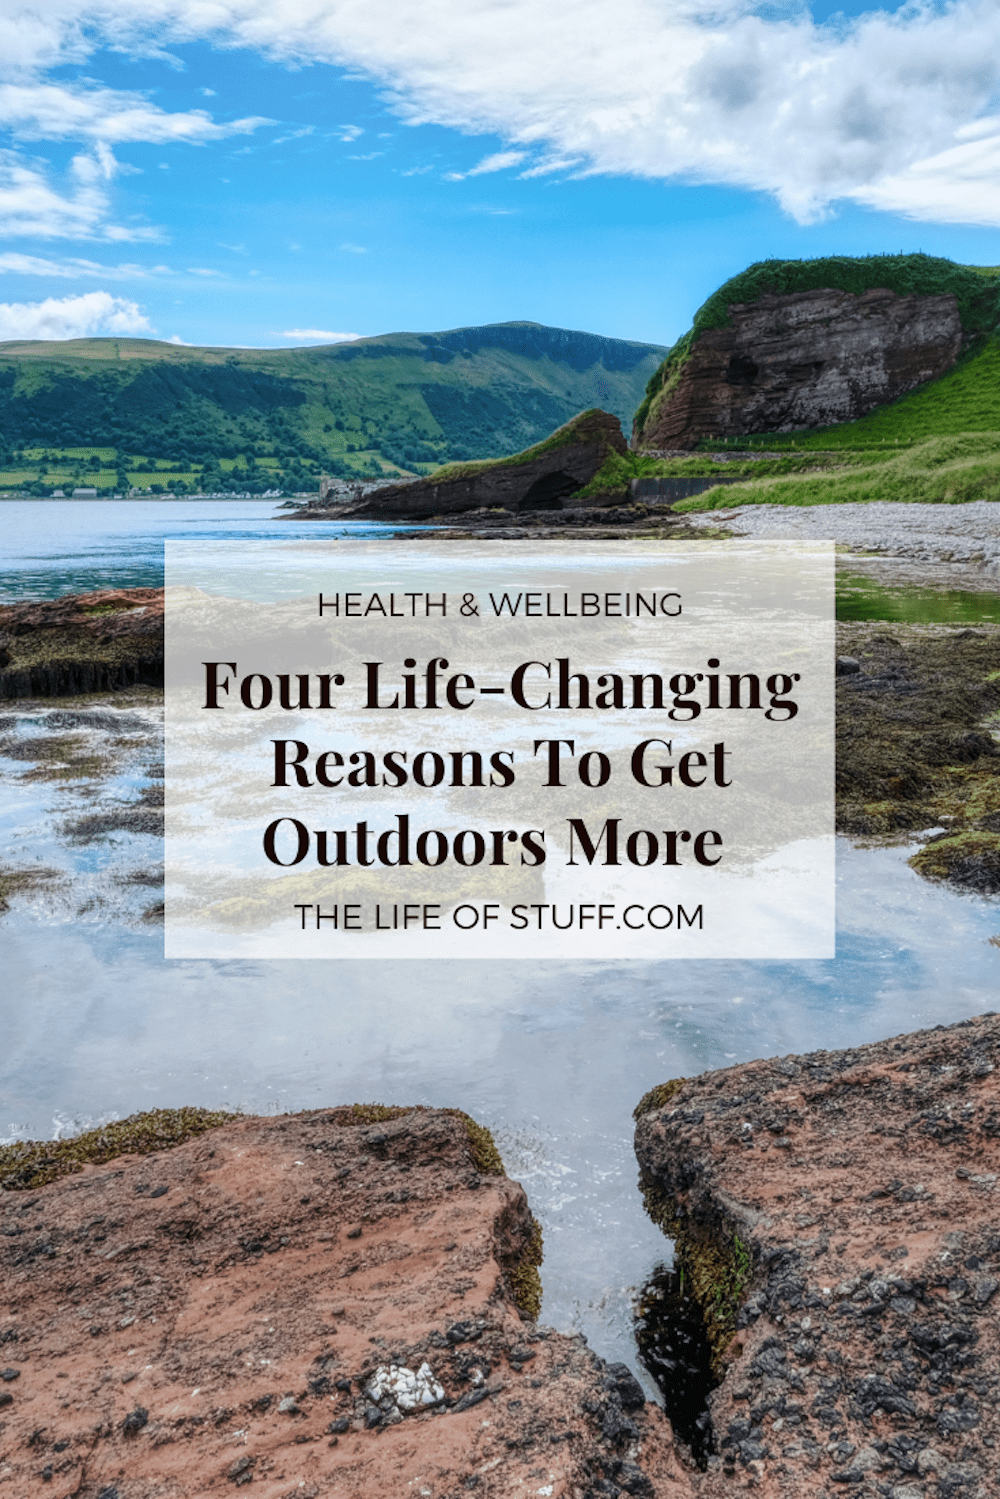 4 Life-Changing Reasons To Get Outdoors More - The Life of Stuff